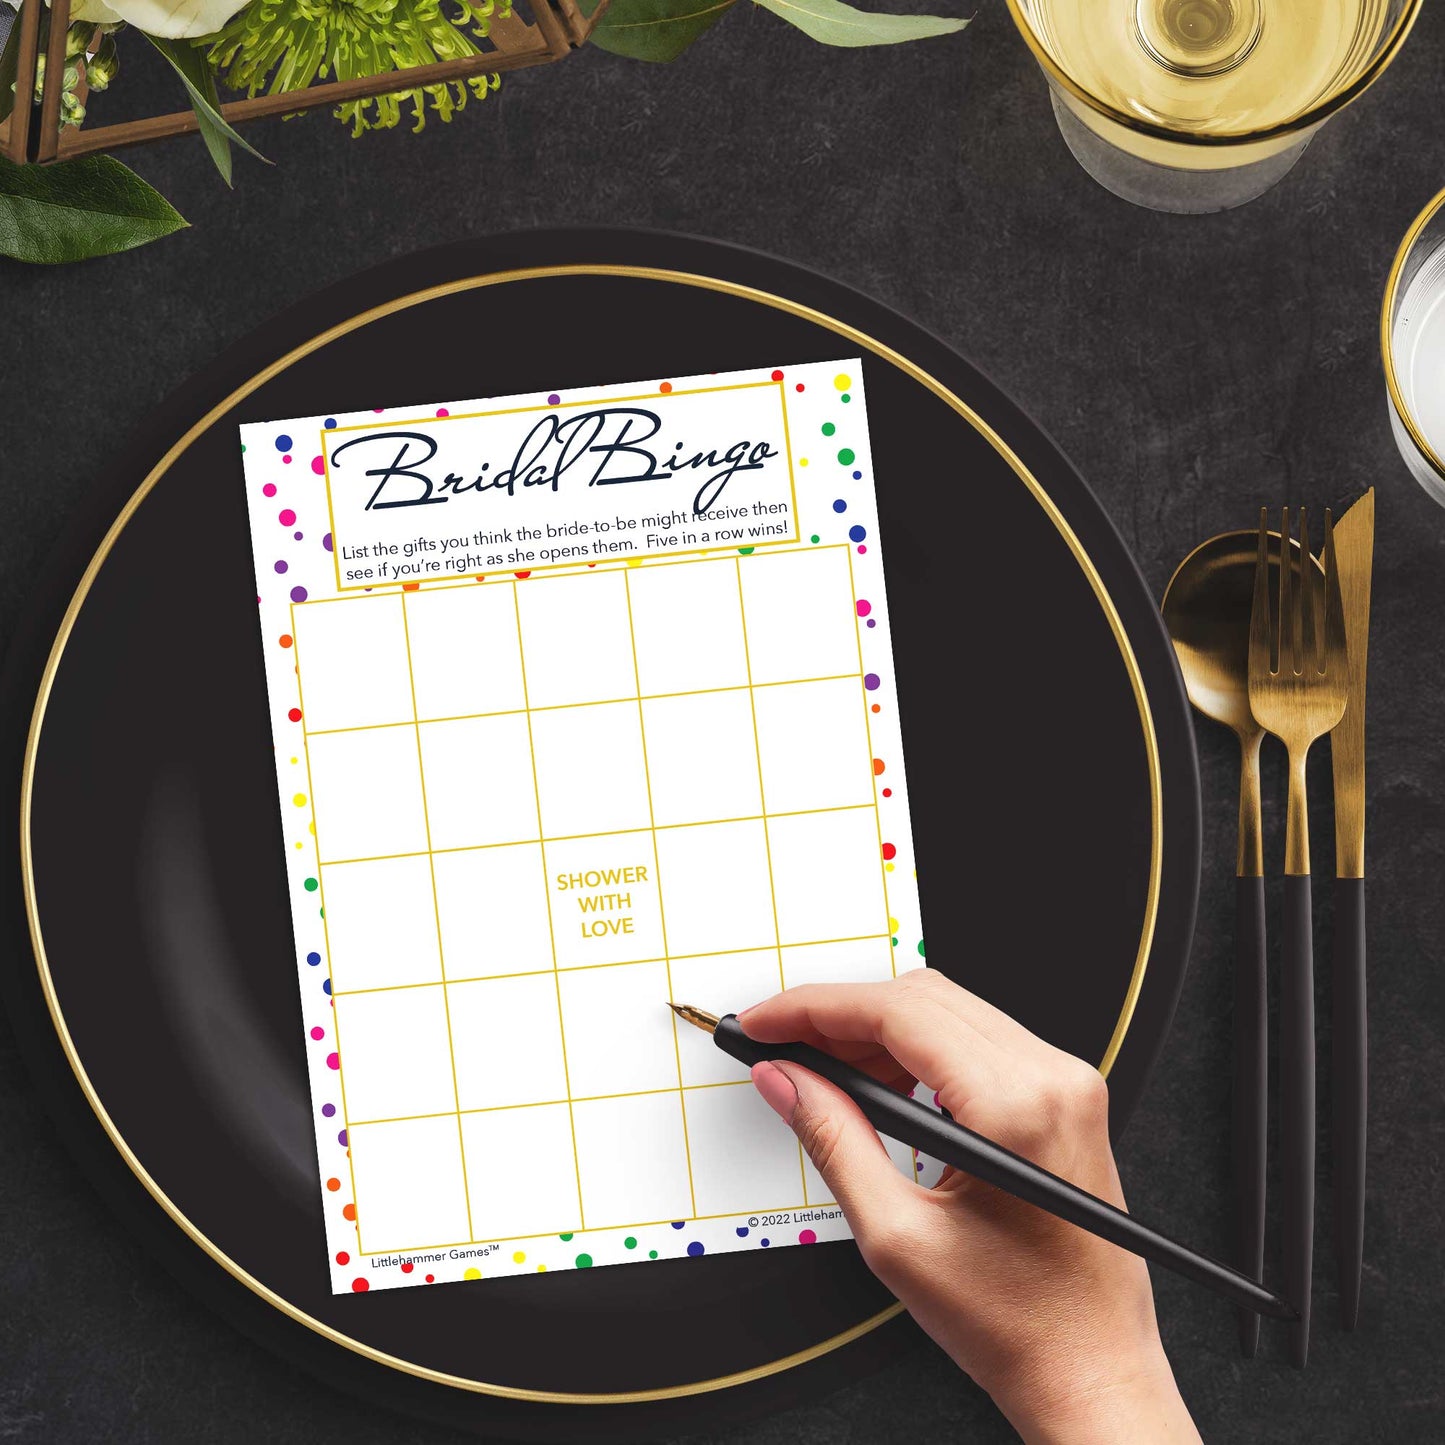 Woman with a pen sitting at a dark place setting with a black and gold plate filling out a rainbow polka dot Bridal Gift Bingo card